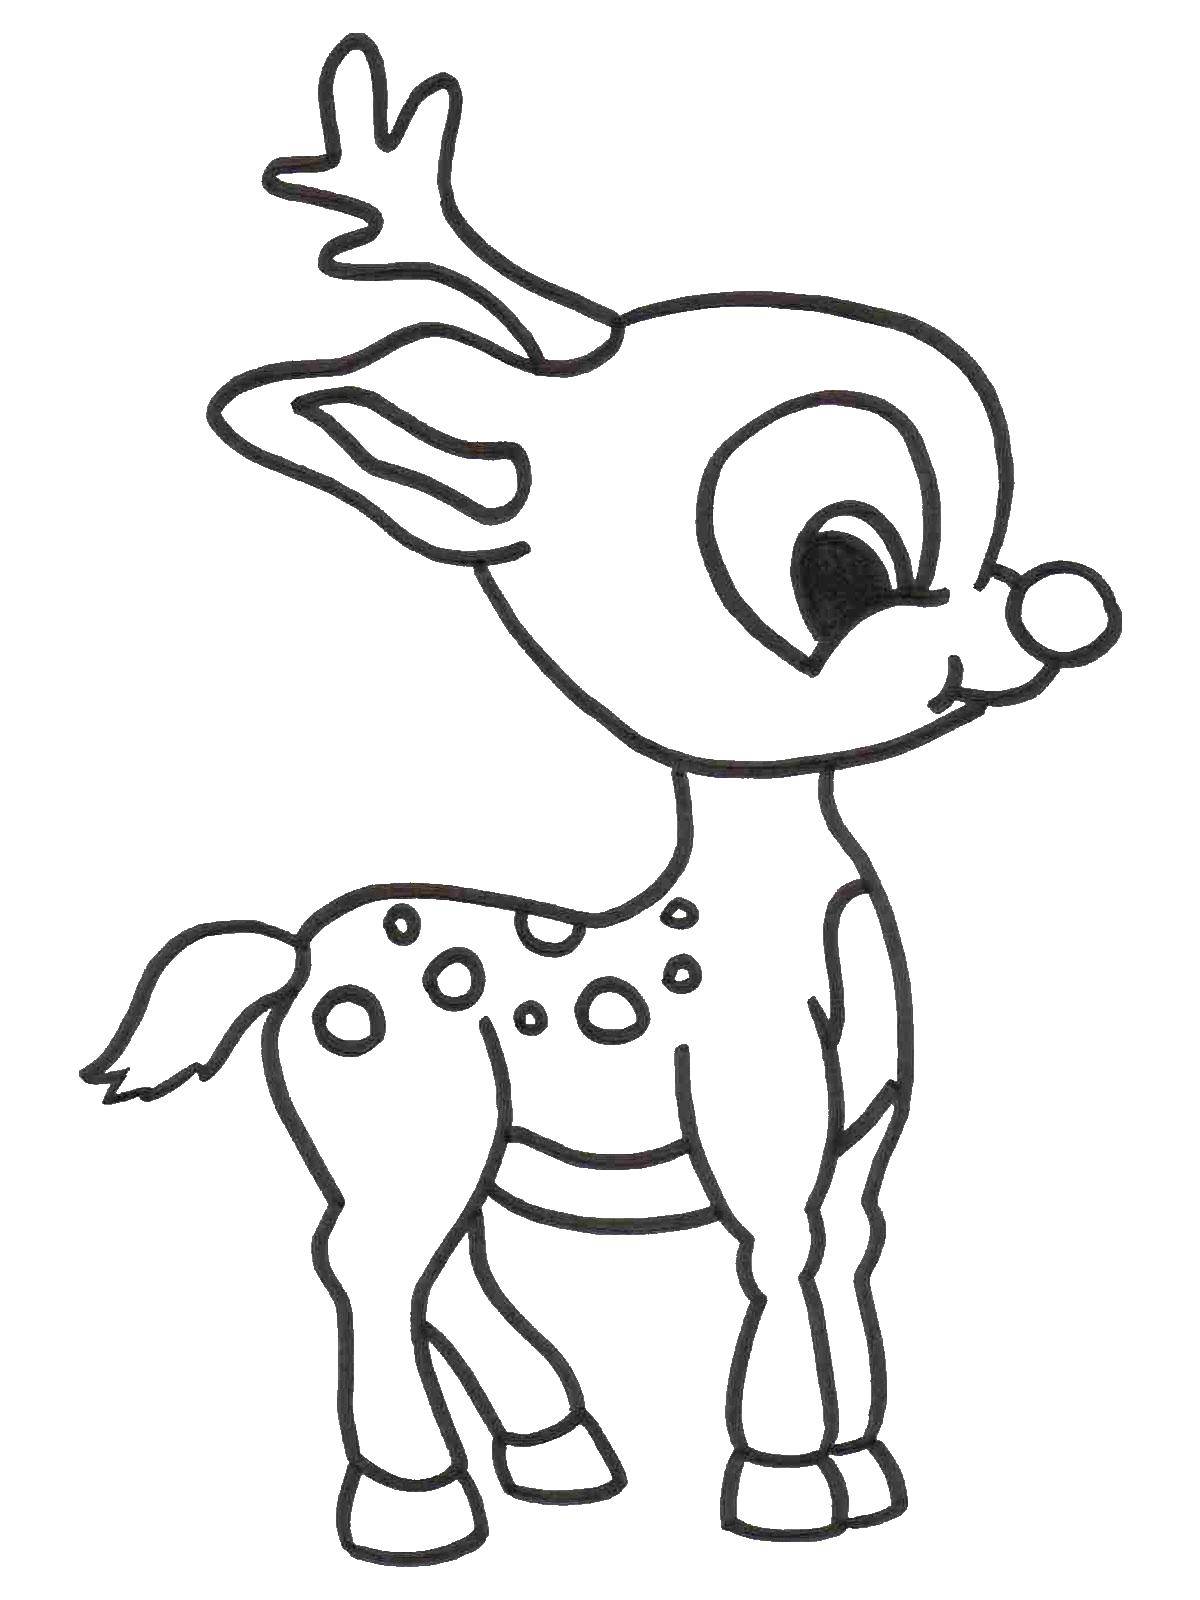 Coloring Little fawn. Category Wild animals. Tags:  deer, eyes, horns.